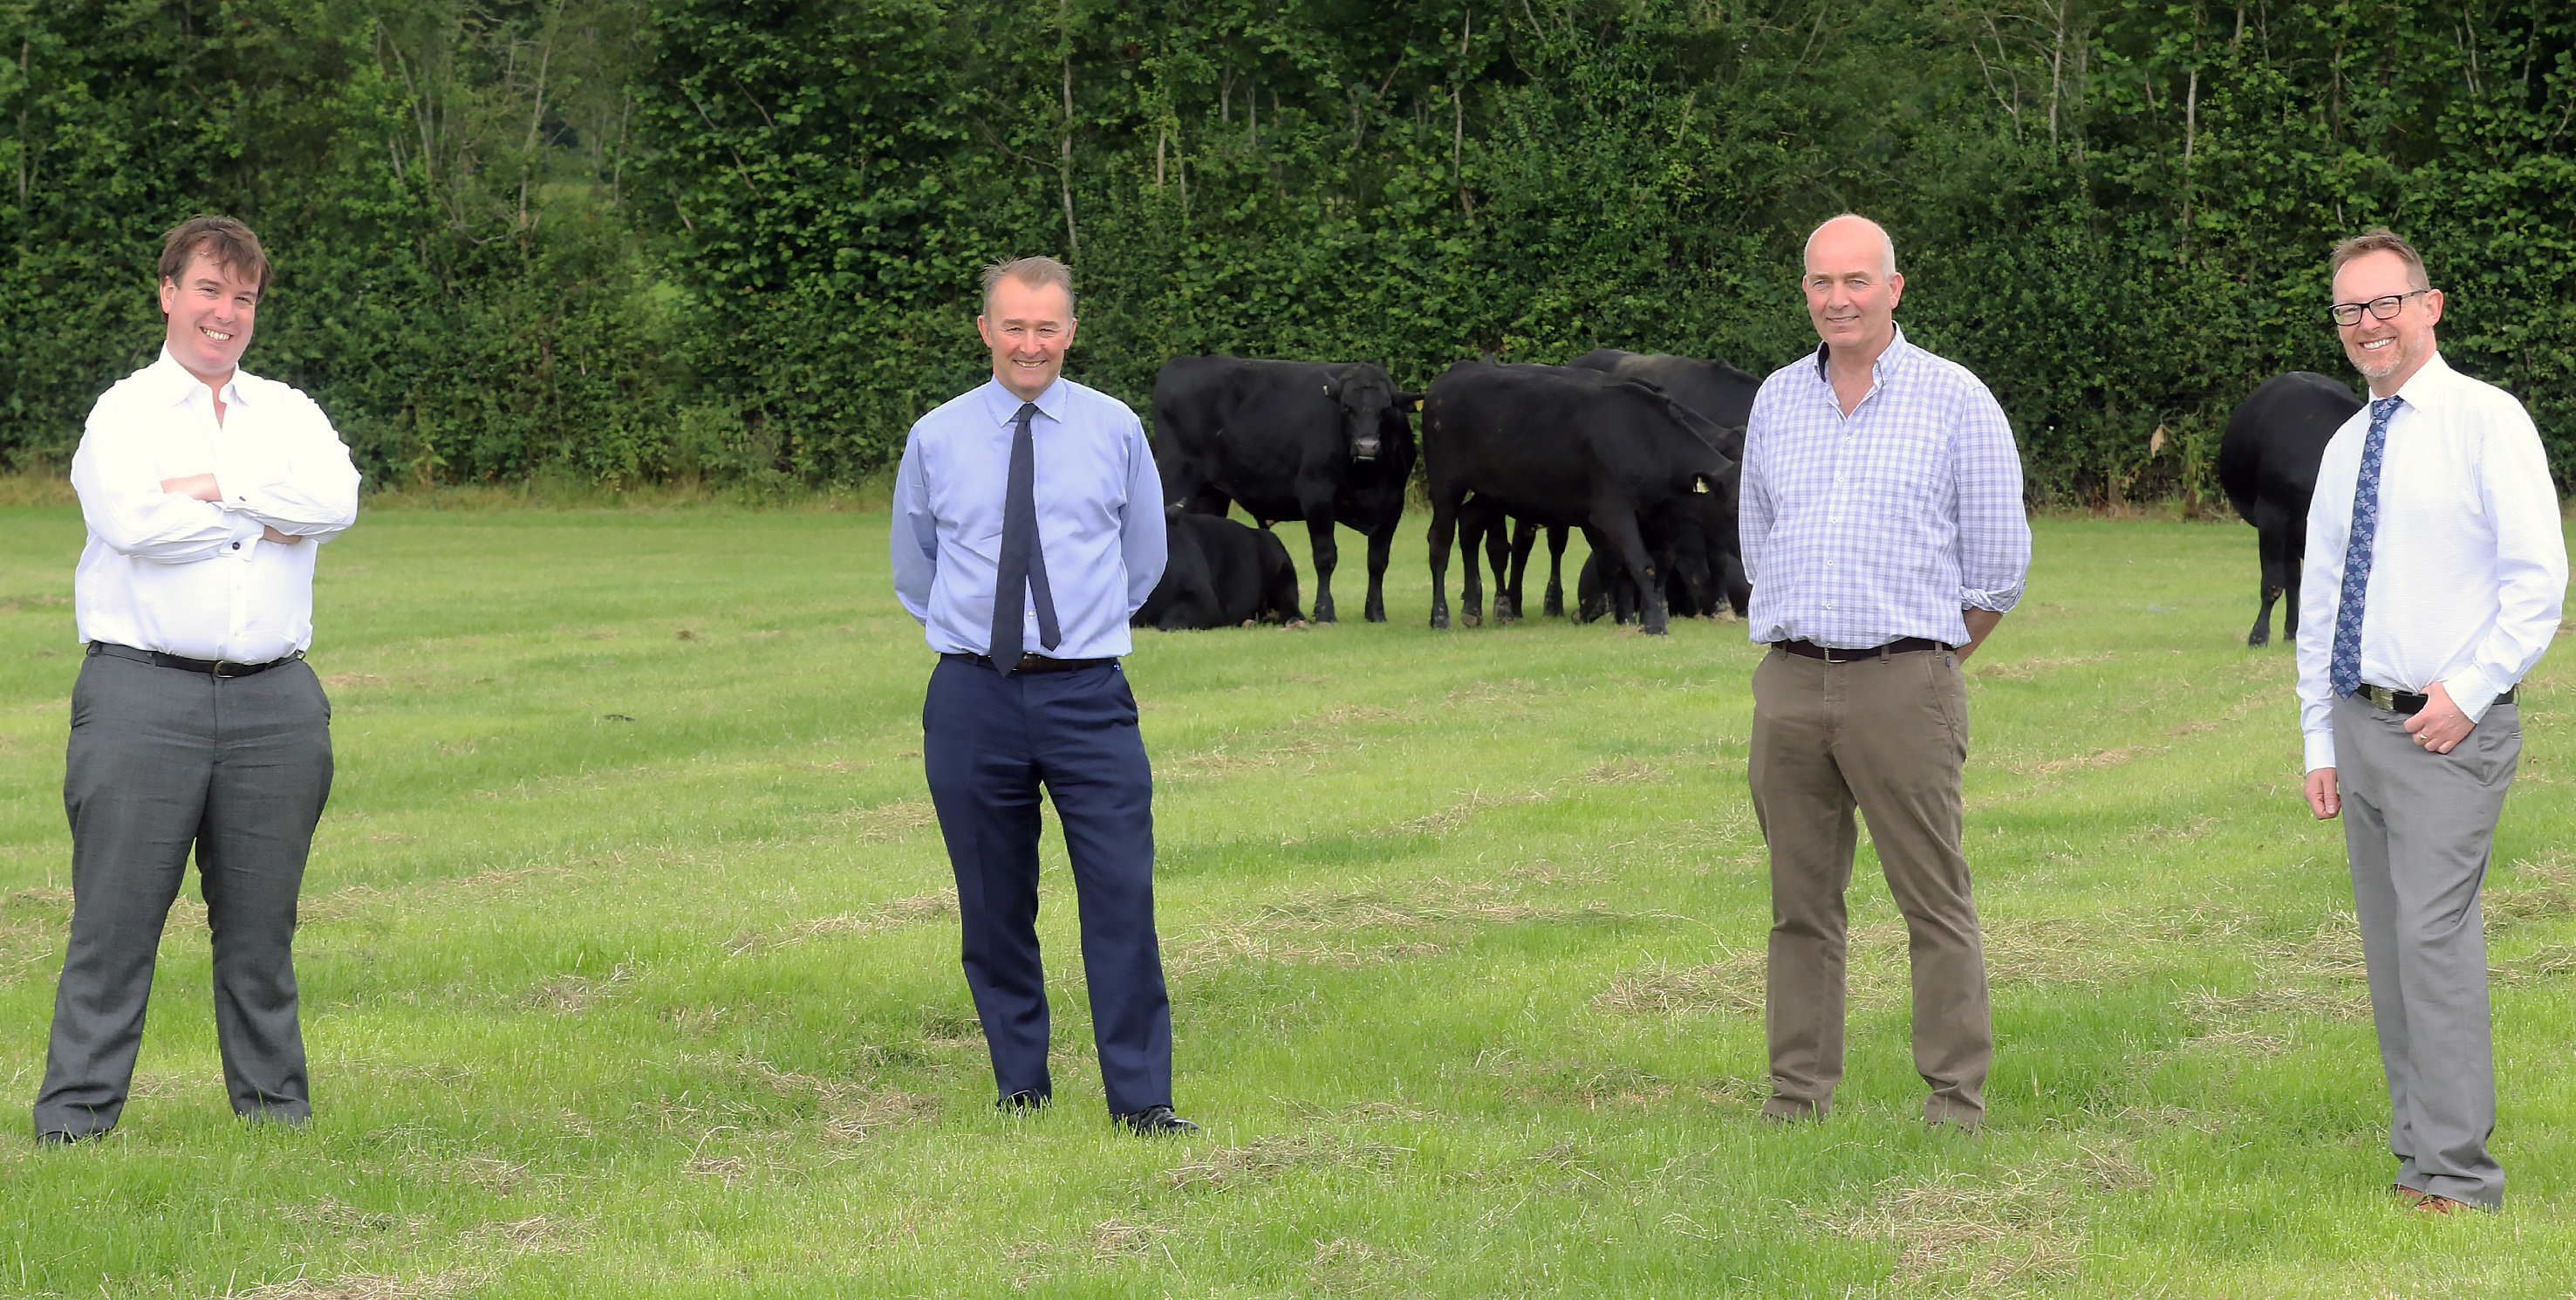 (L-R) Craig Williams MP, Secretary of State for Wales Simon Hart, Greg Pickstock and Russell George MS at Pickstock's Farm, Llanfechain. Photo by Phil Blagg Photography